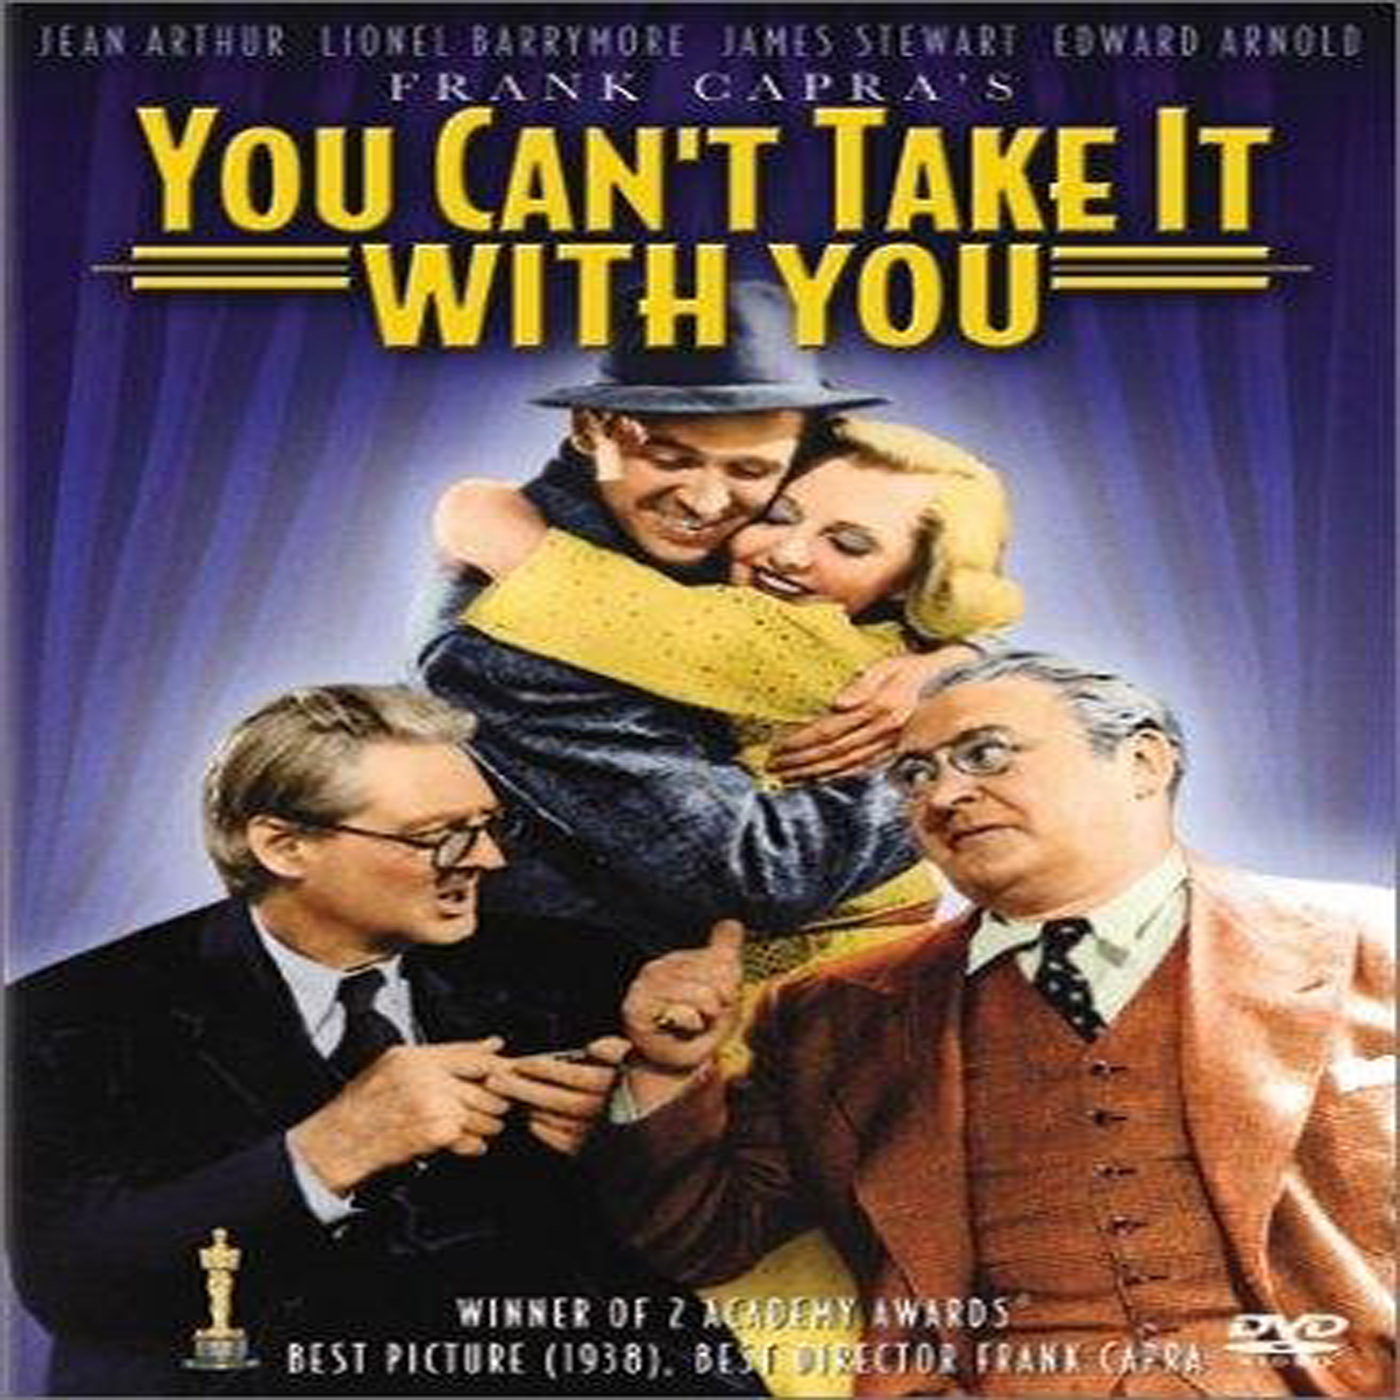 Movie Reviews! - "You Can't Take It With You"